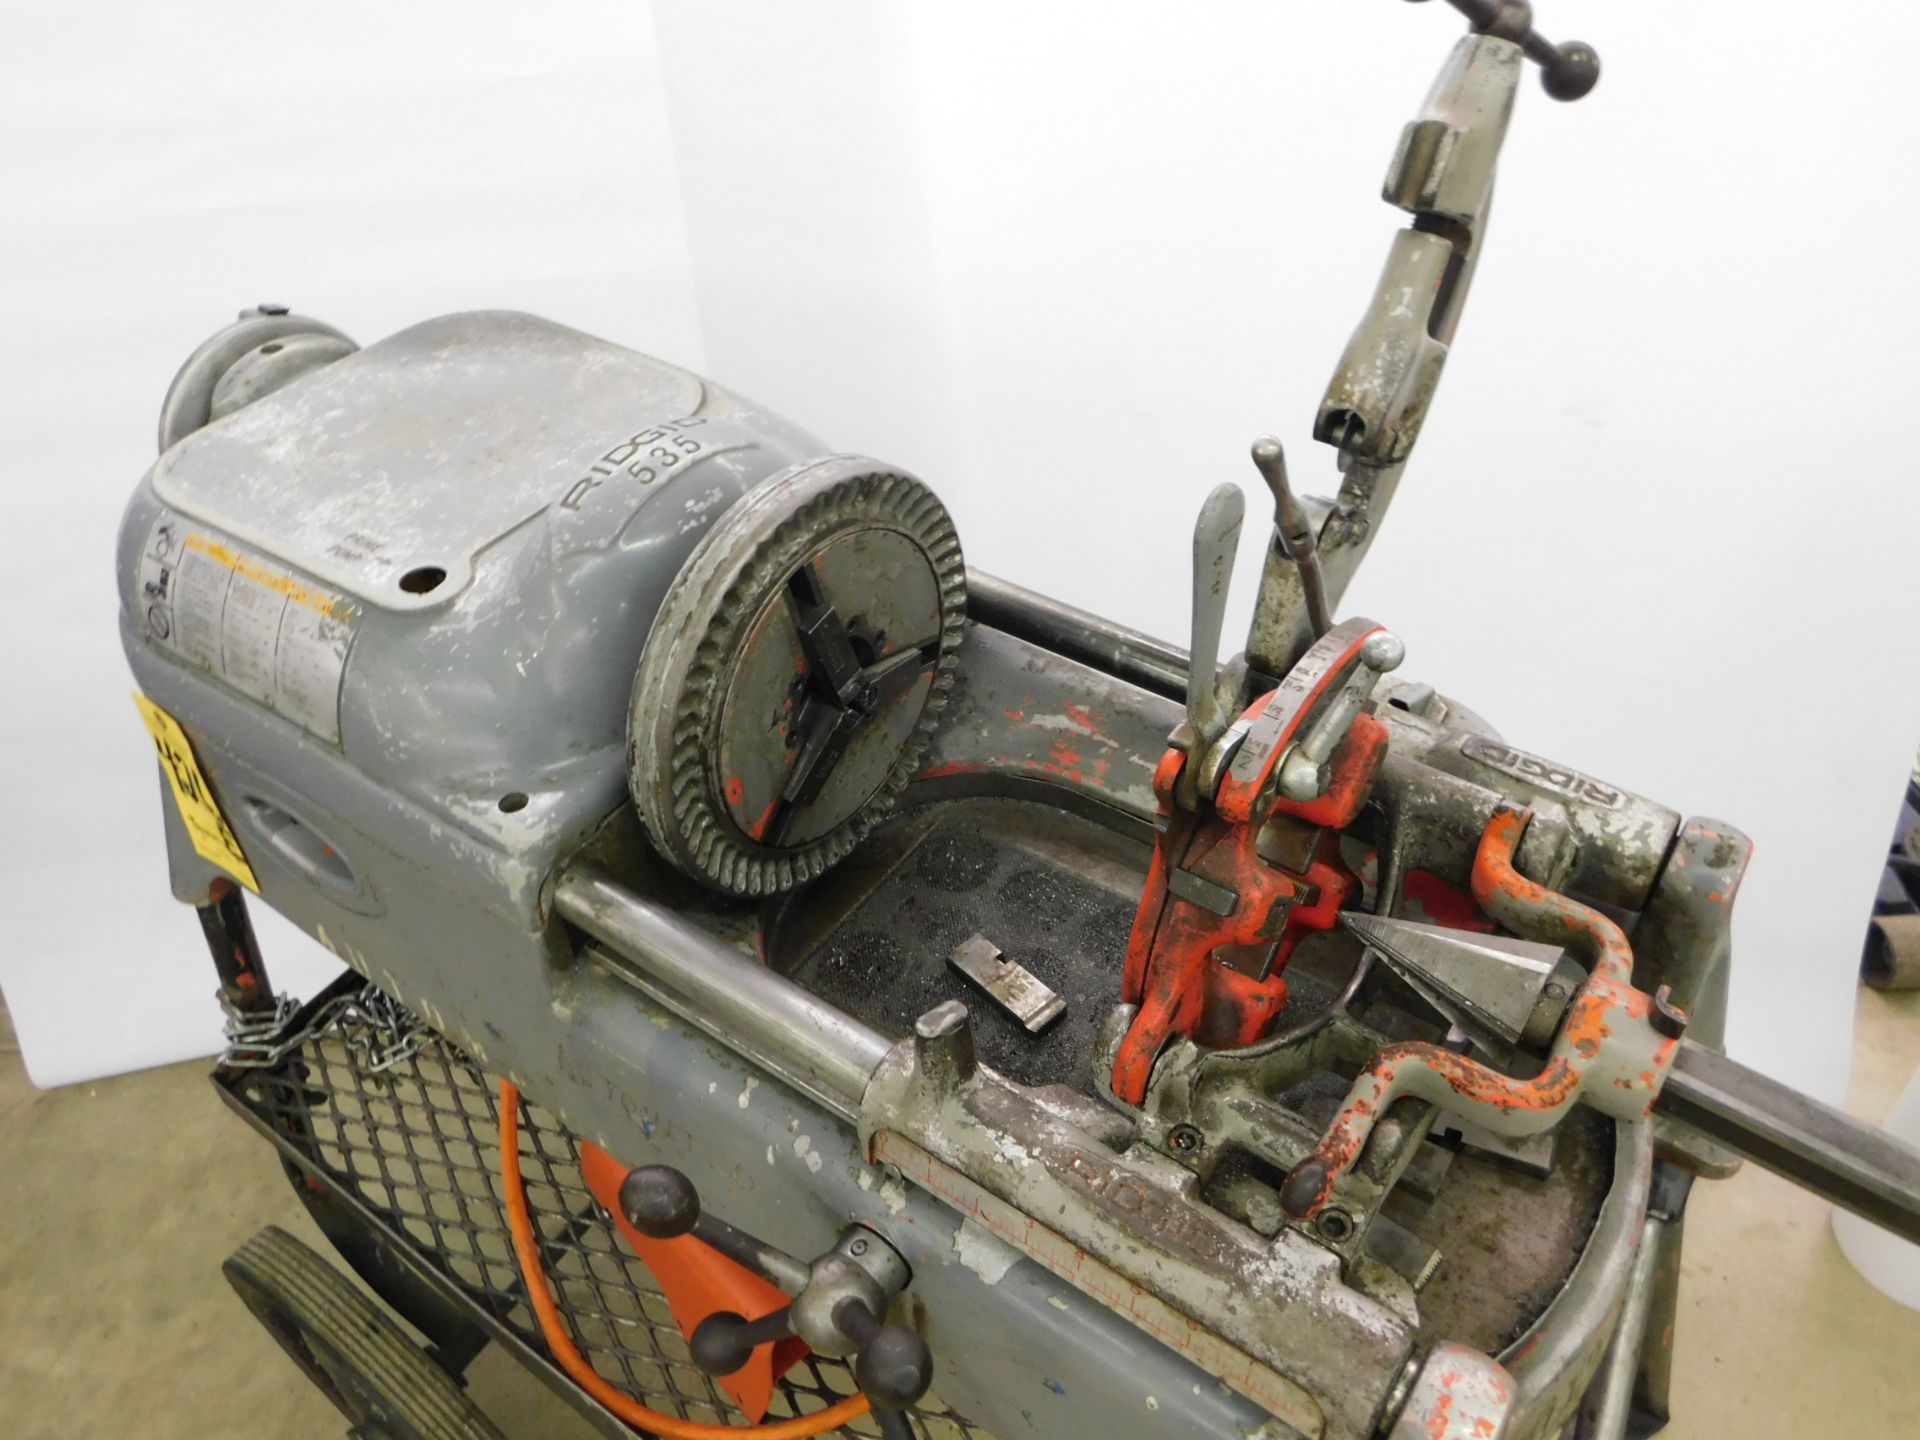 Ridgid Model 535 Pipe Threader, SN EC0 3267, with Die Head, Pipe Cut-Off, Reamer, and Foot Pedal - Image 2 of 12